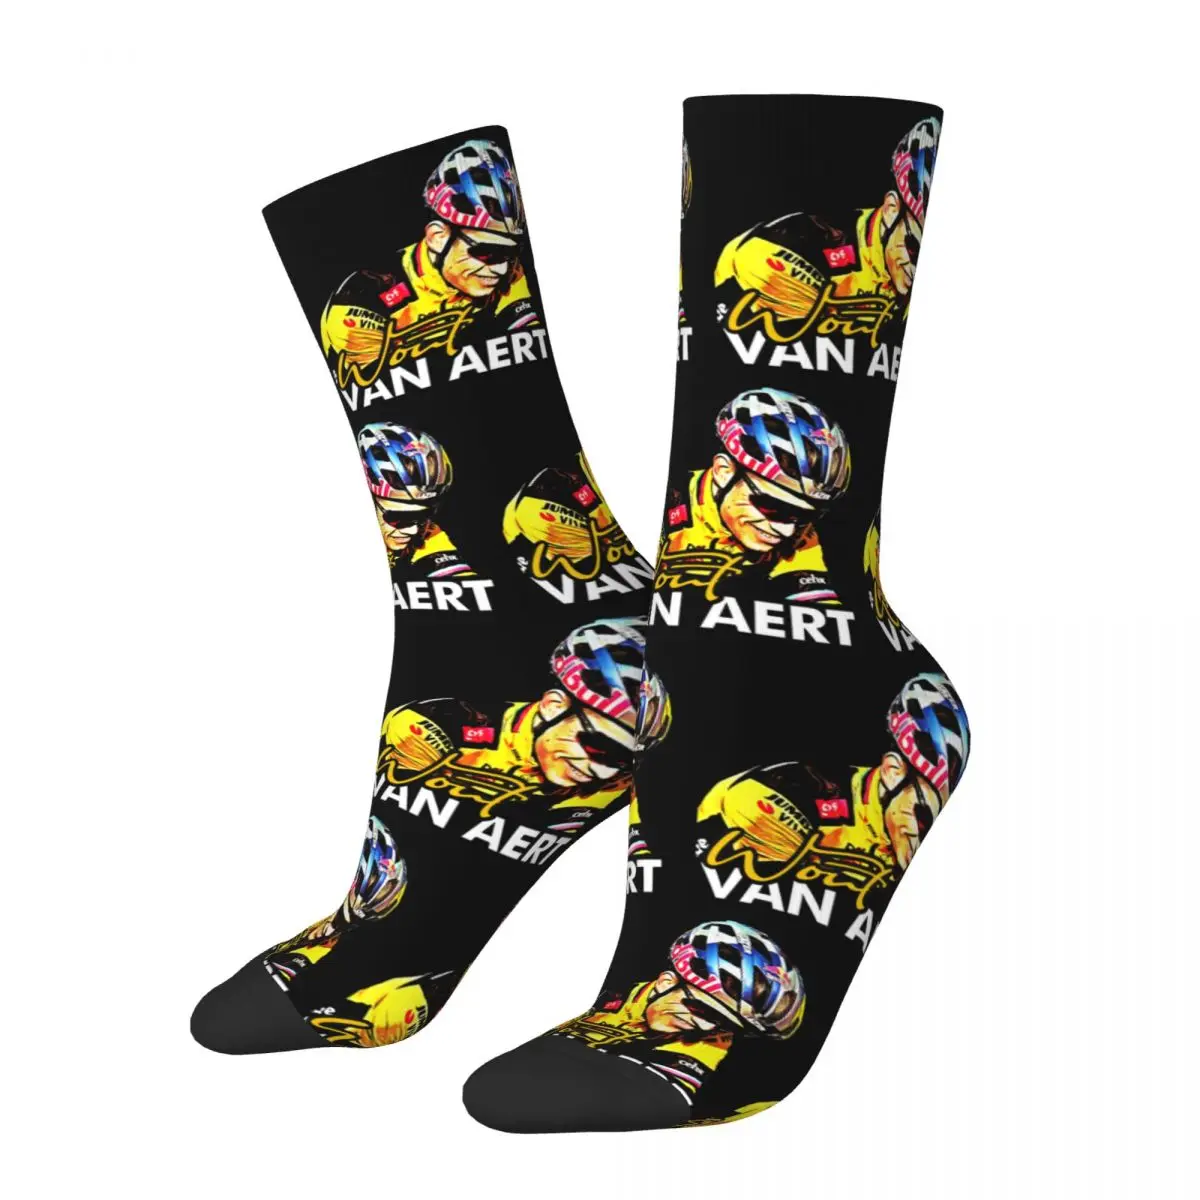 

Casual Male Socks Wout Van Aert Product Warm Belgian Cyclist Racer Graphic Stockings All Seasons Birthday Present